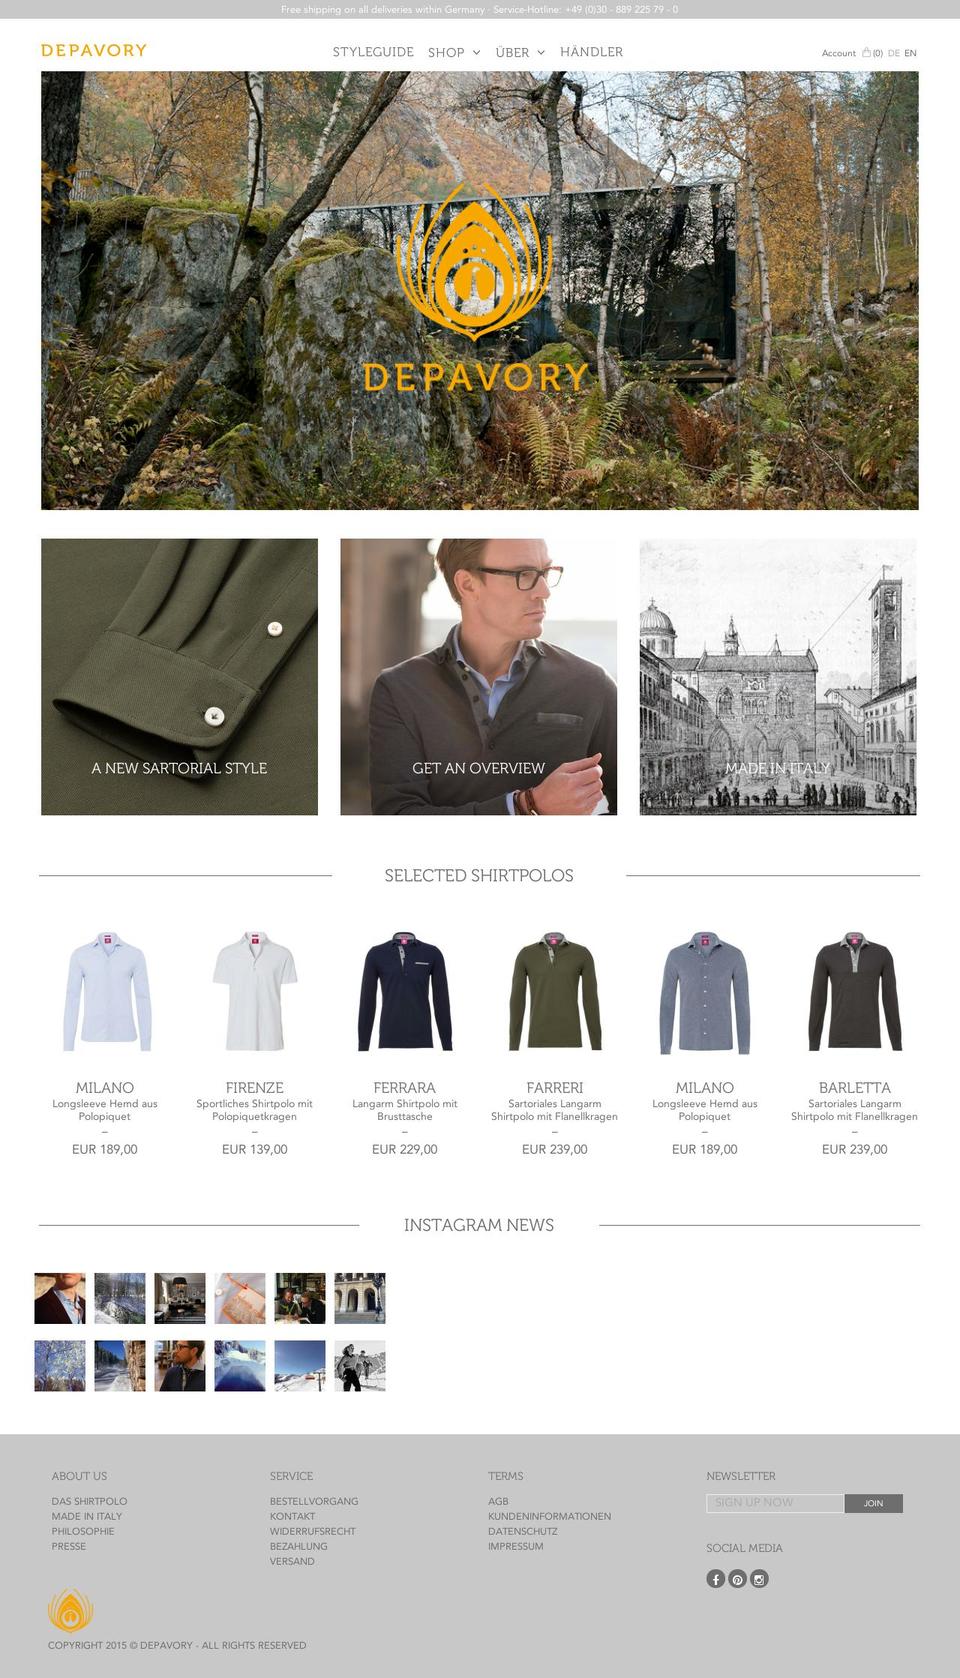 Depavory (2016-05-13) Shopify theme site example depavory.org